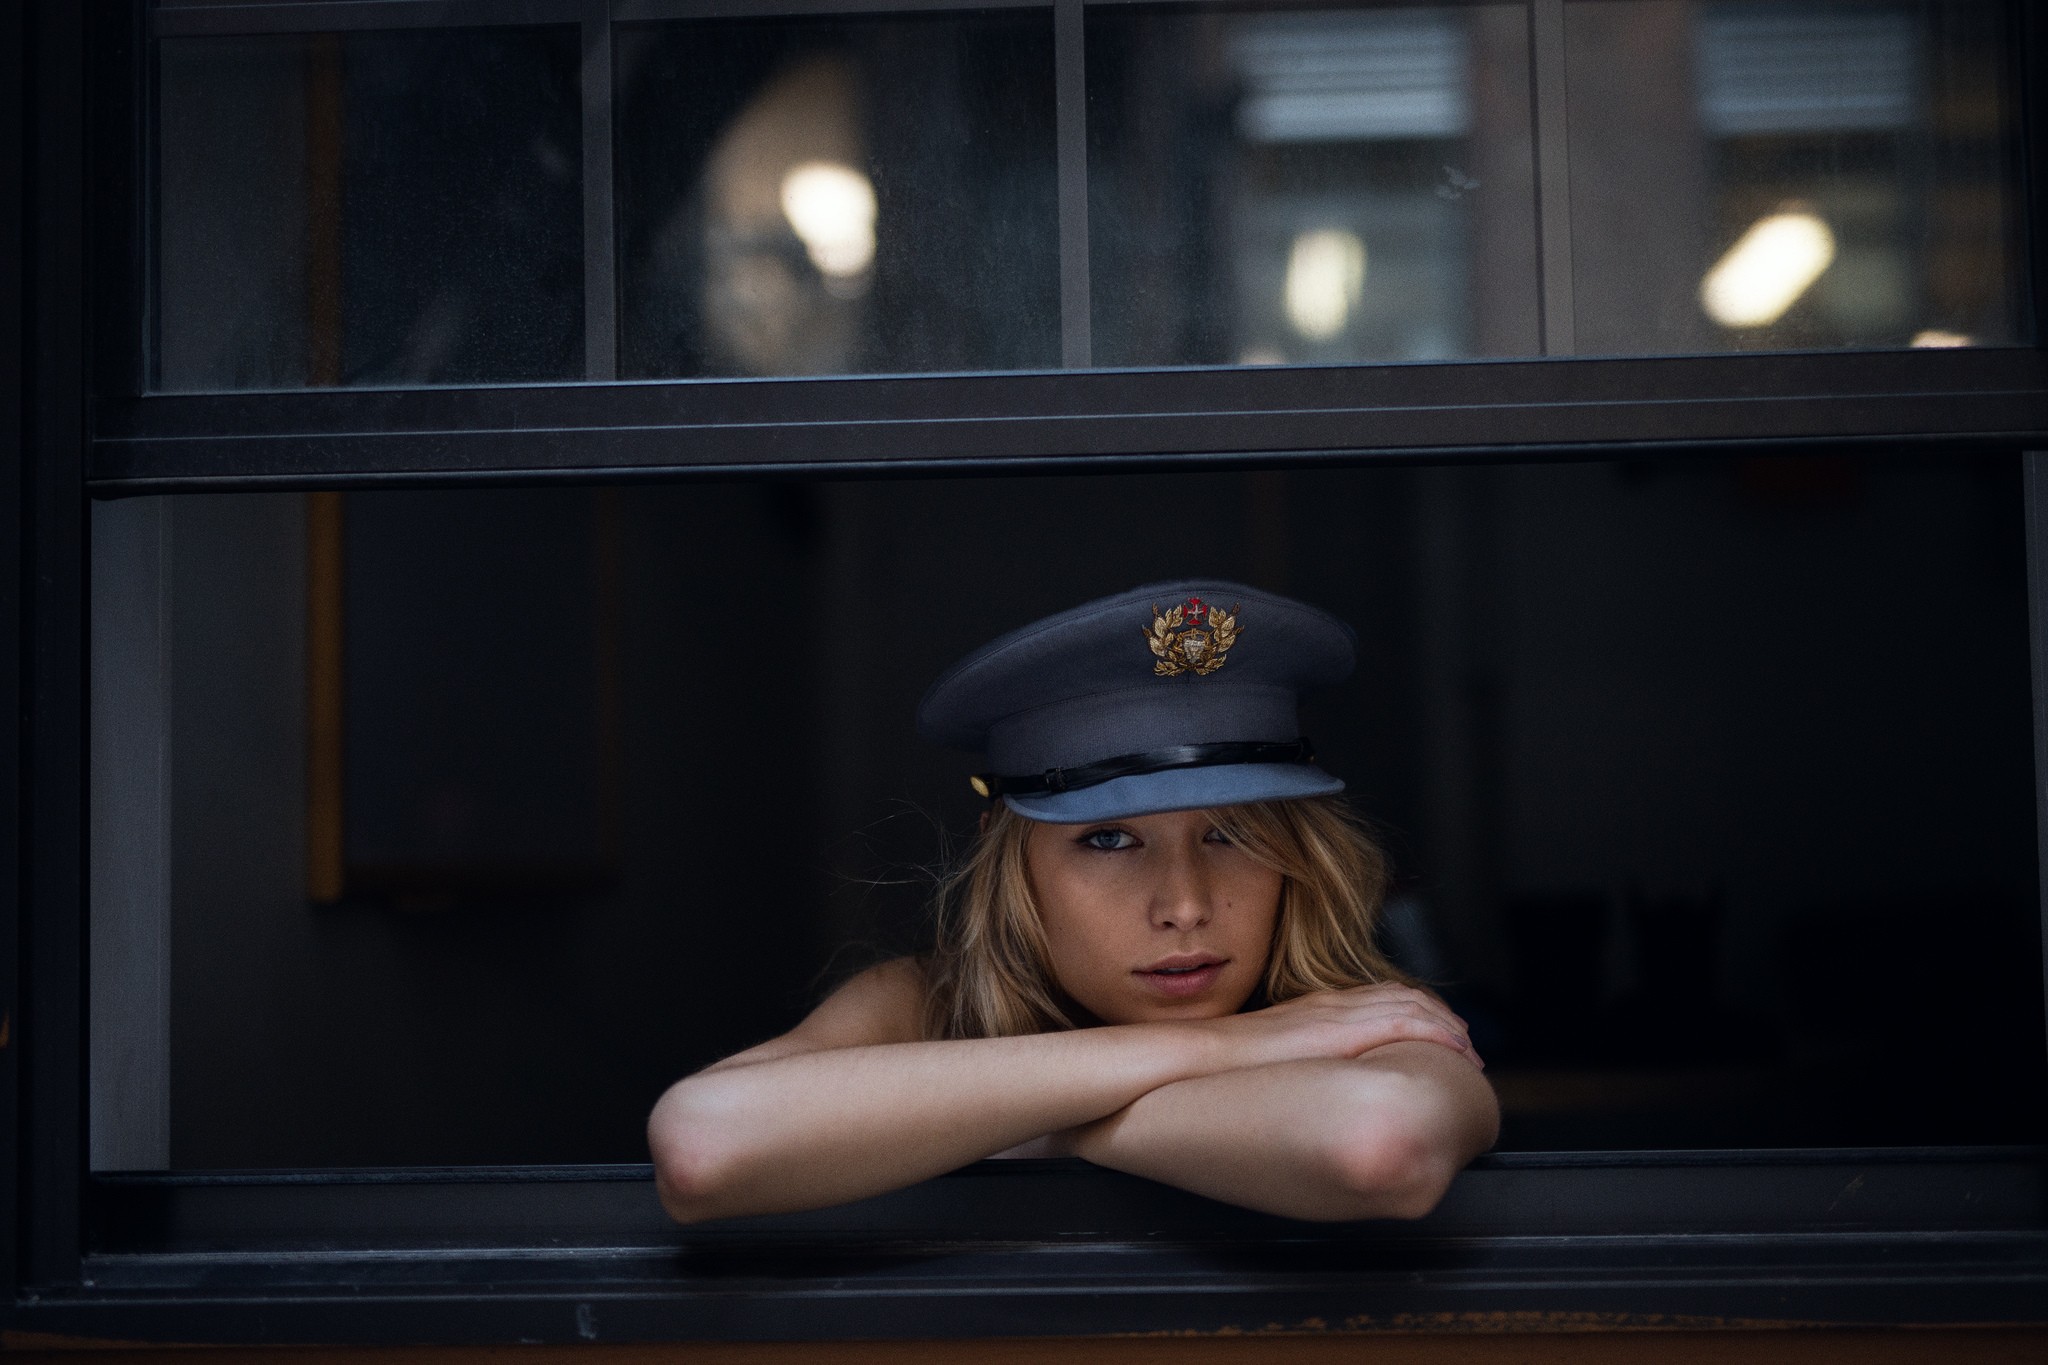 People 2048x1365 window women model hat looking at viewer blonde women with hats looking out window arms crossed hair over one eye